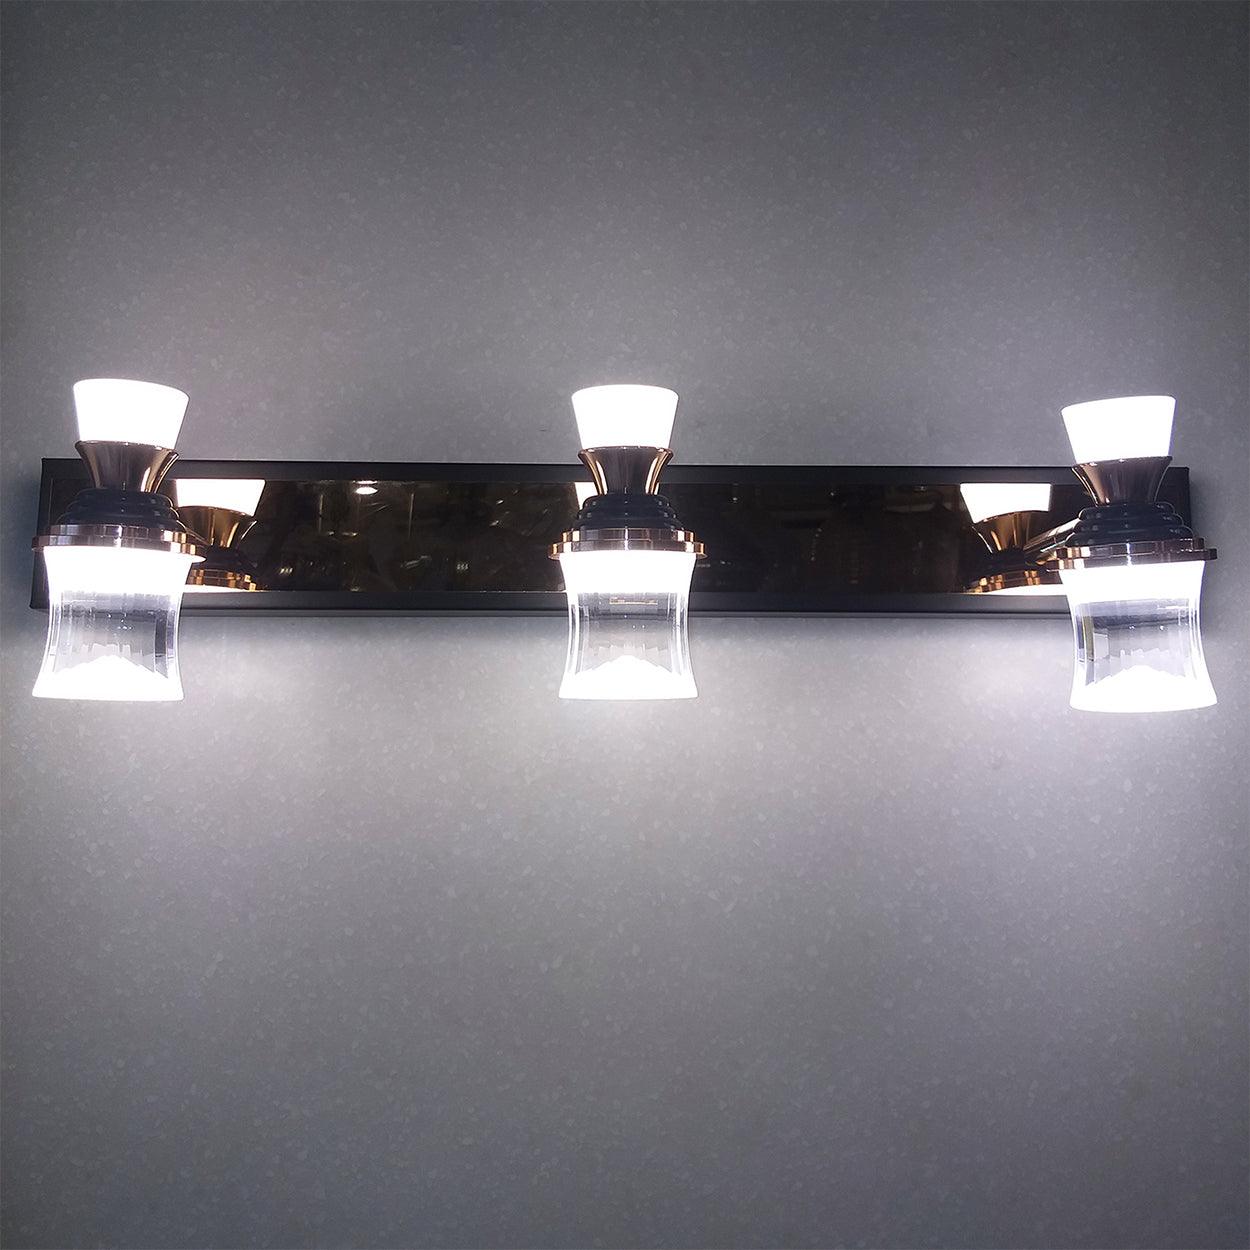 ANKUR COPPER HAT WITH GLASS BUBBLE LED MIRROR PICTURE WALL LIGHT - Ankur Lighting